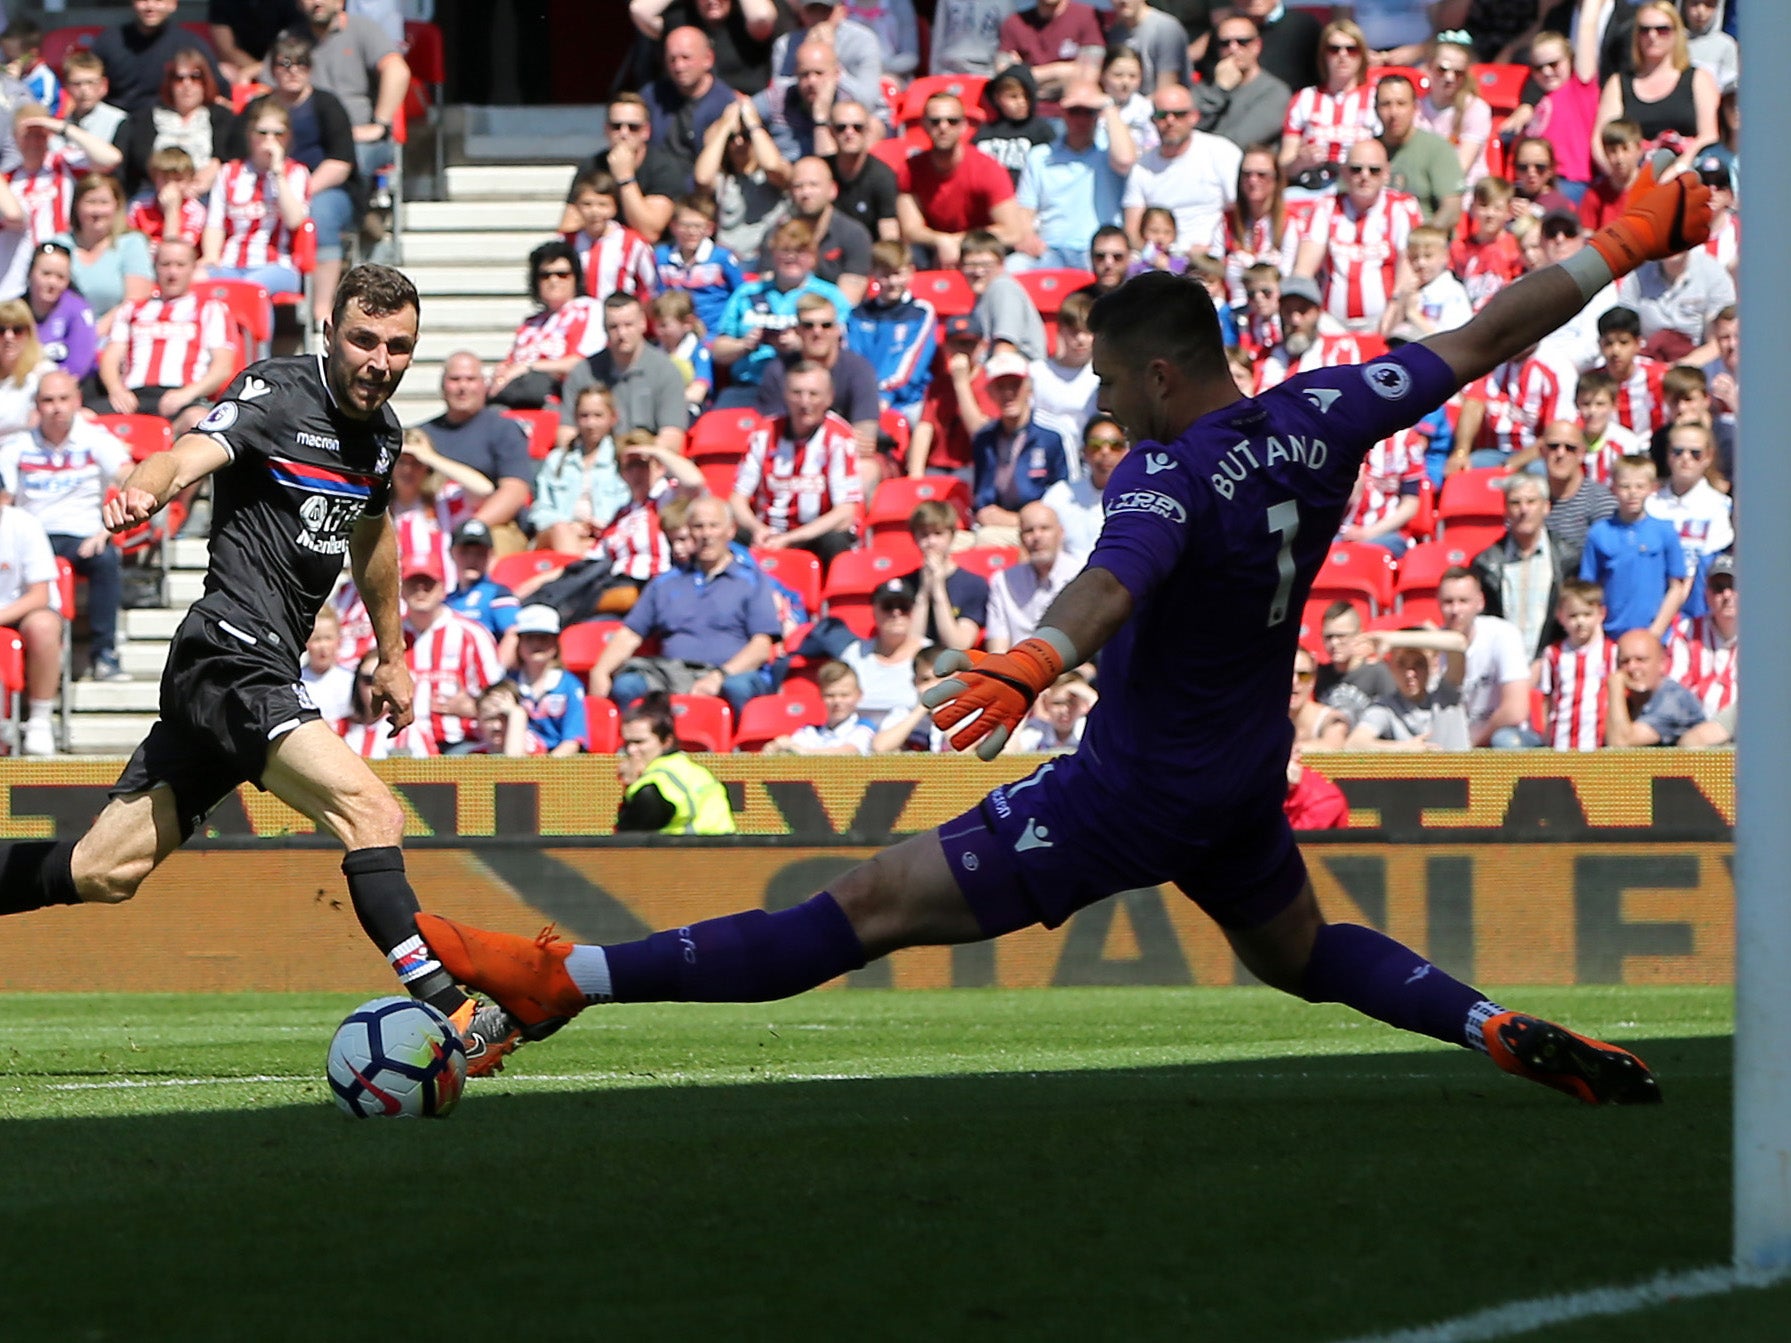 McArthur levelled things up for Palace